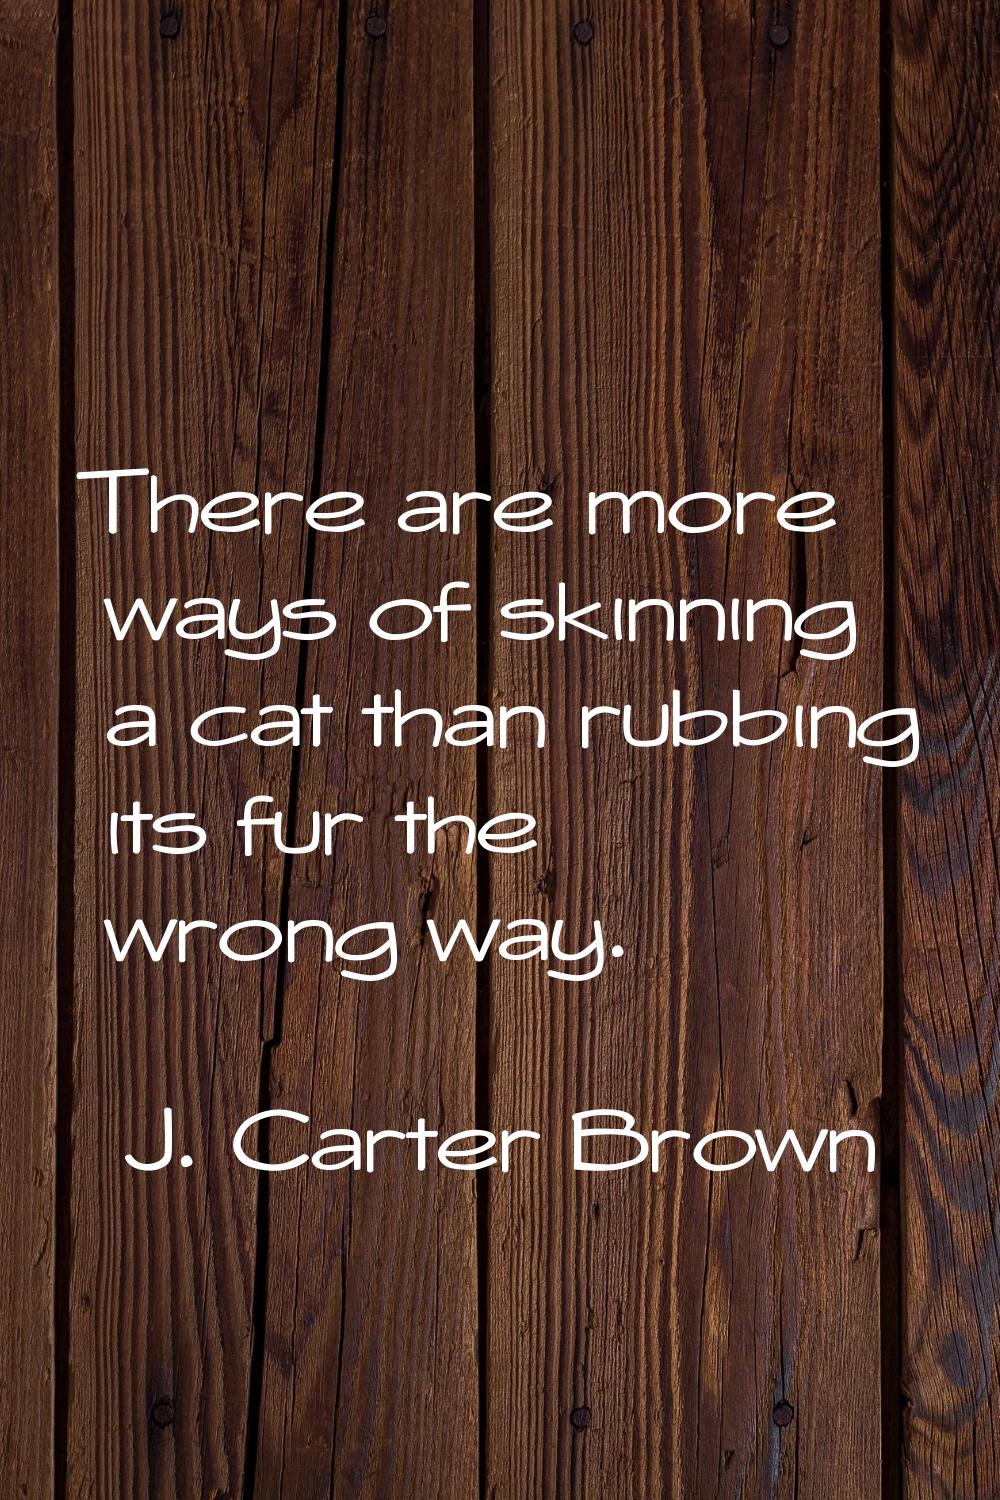 There are more ways of skinning a cat than rubbing its fur the wrong way.